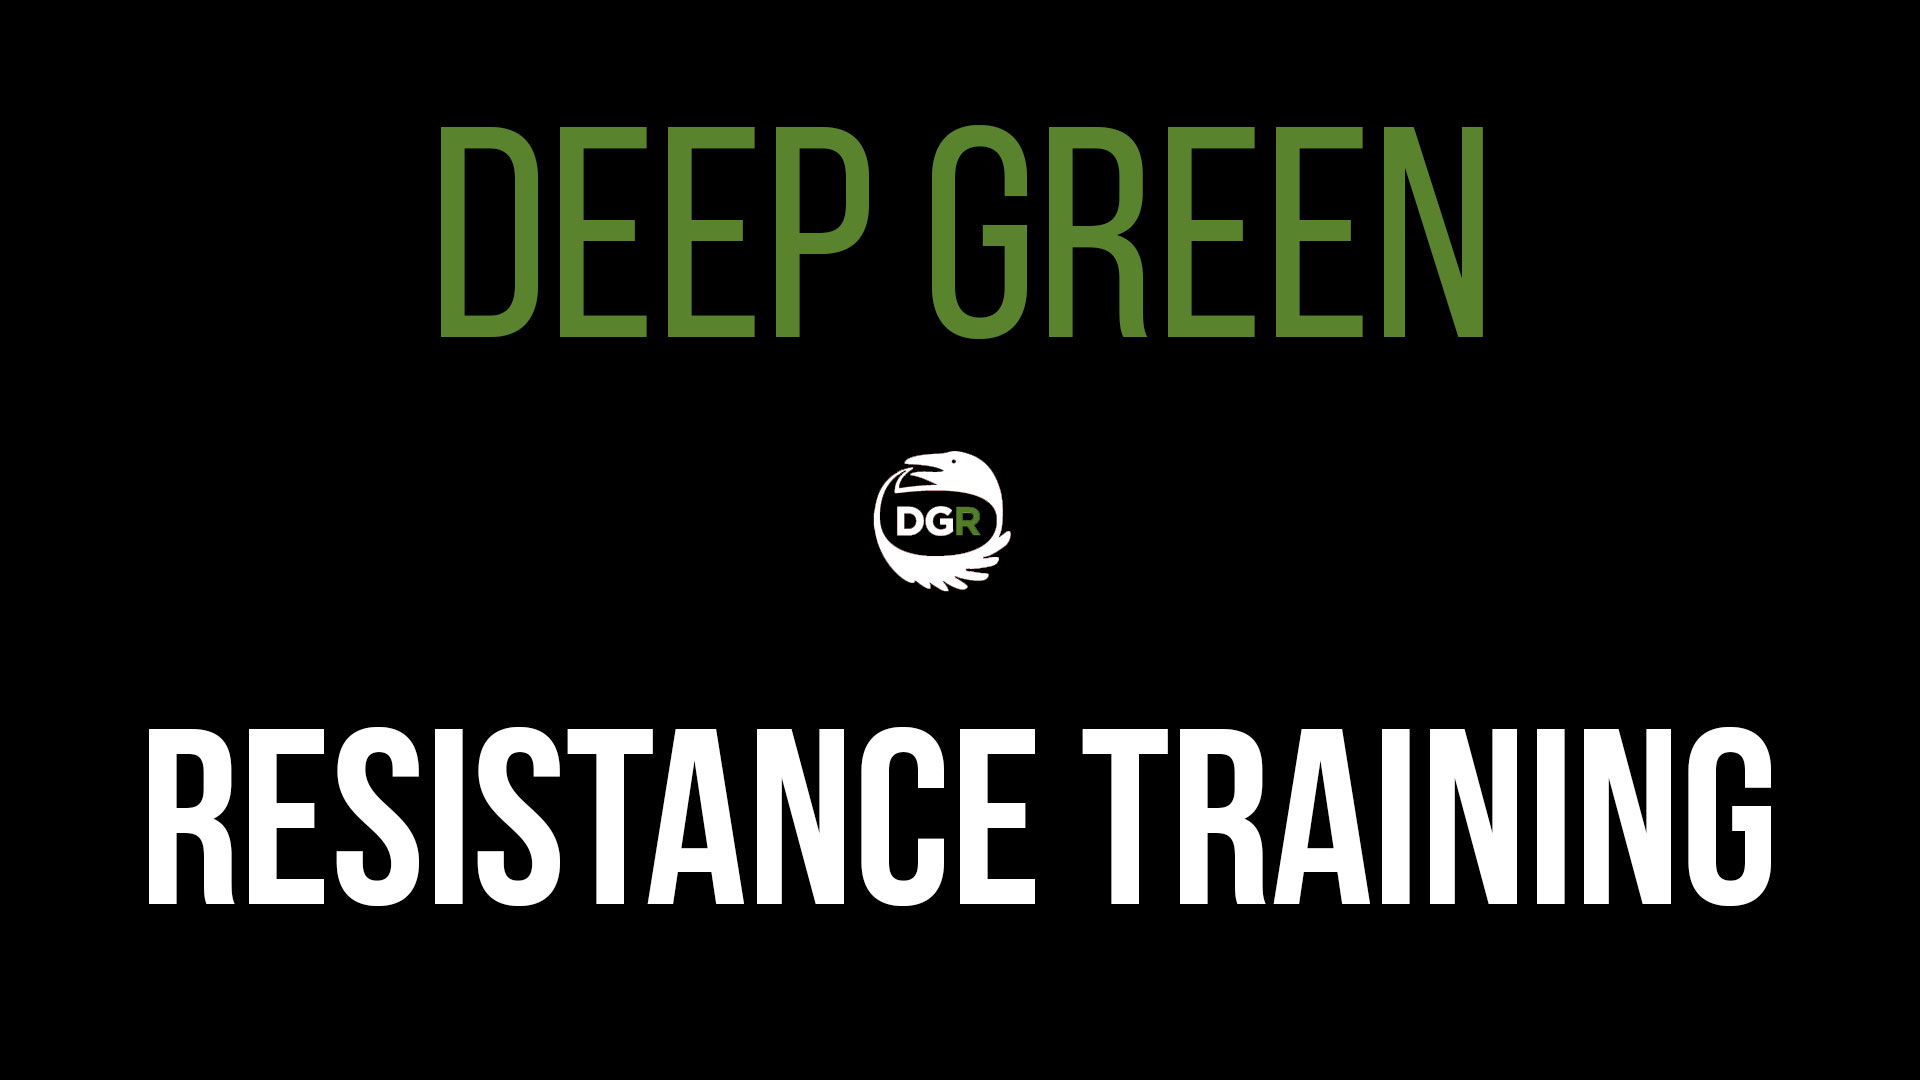 Deep Green Resistance Training at Yellowstone National Park in June 2018